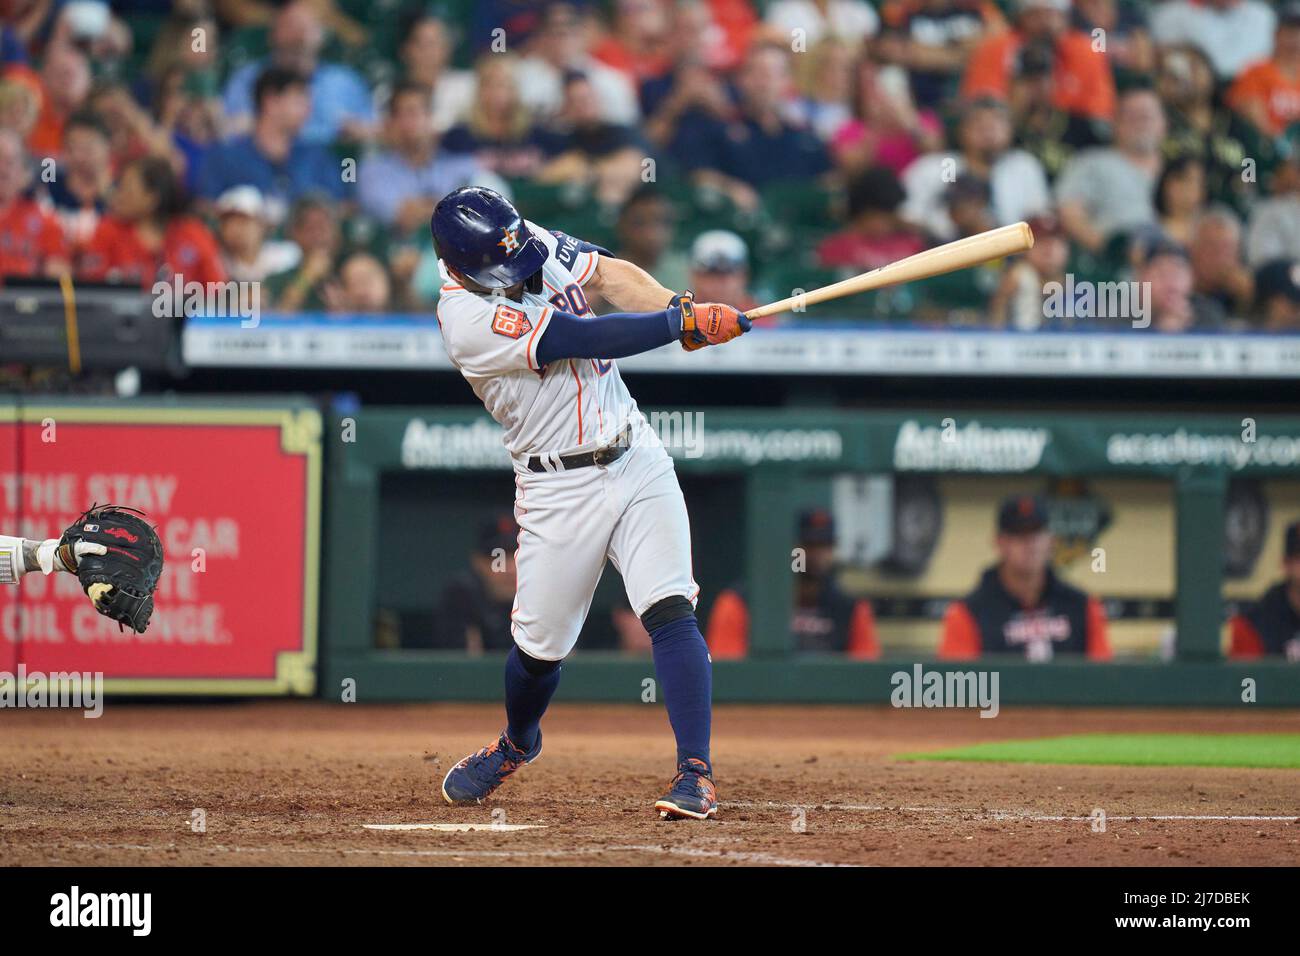 May 7 2022: Houston second baseman Jose Altuve (27) gets a hit during the  game with